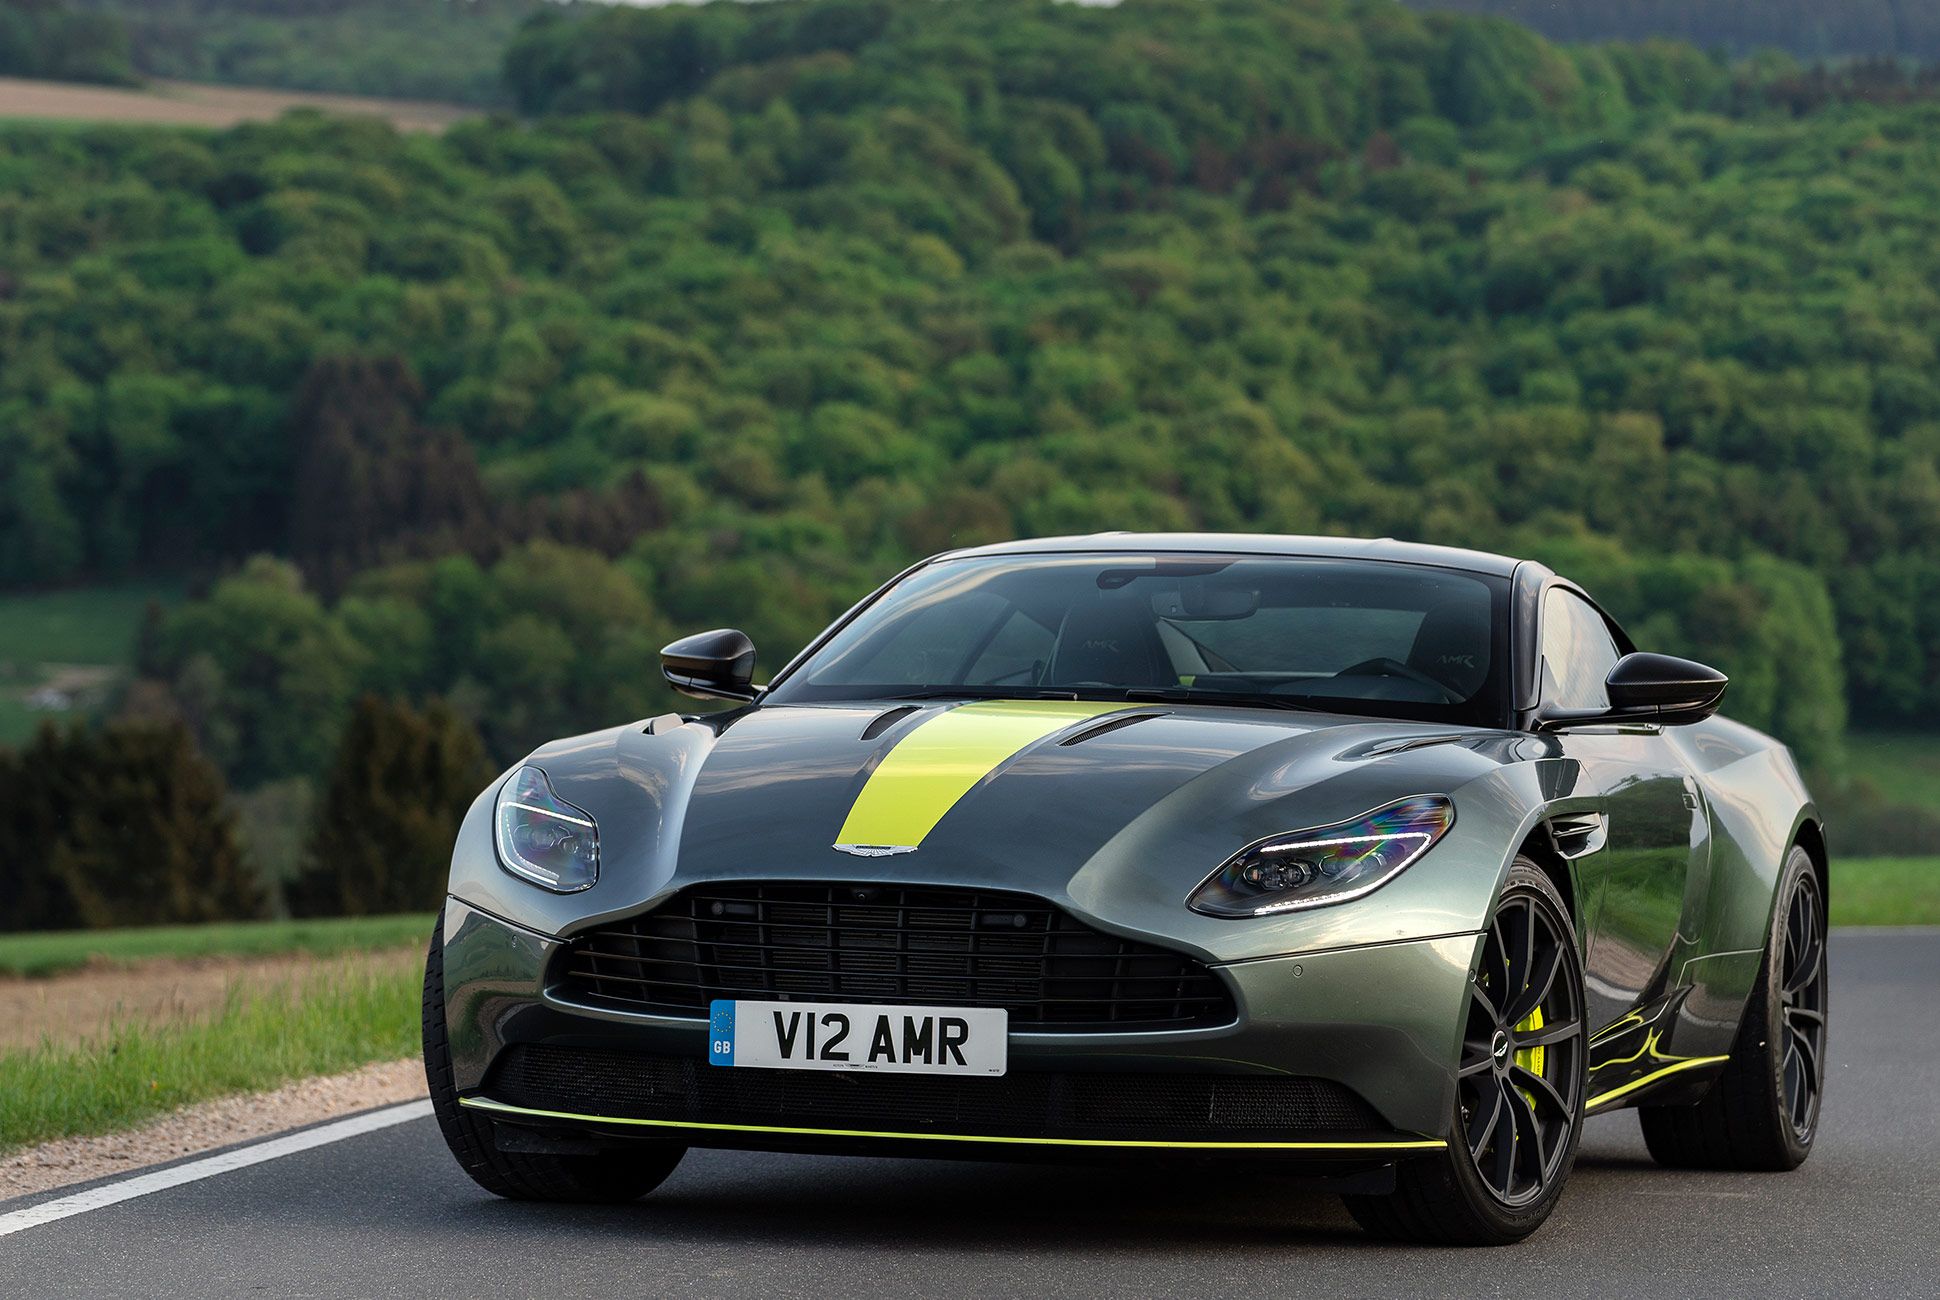 2019 Aston Martin Db11 Amr Review: The Car Aston Should Have Made In The  First Place